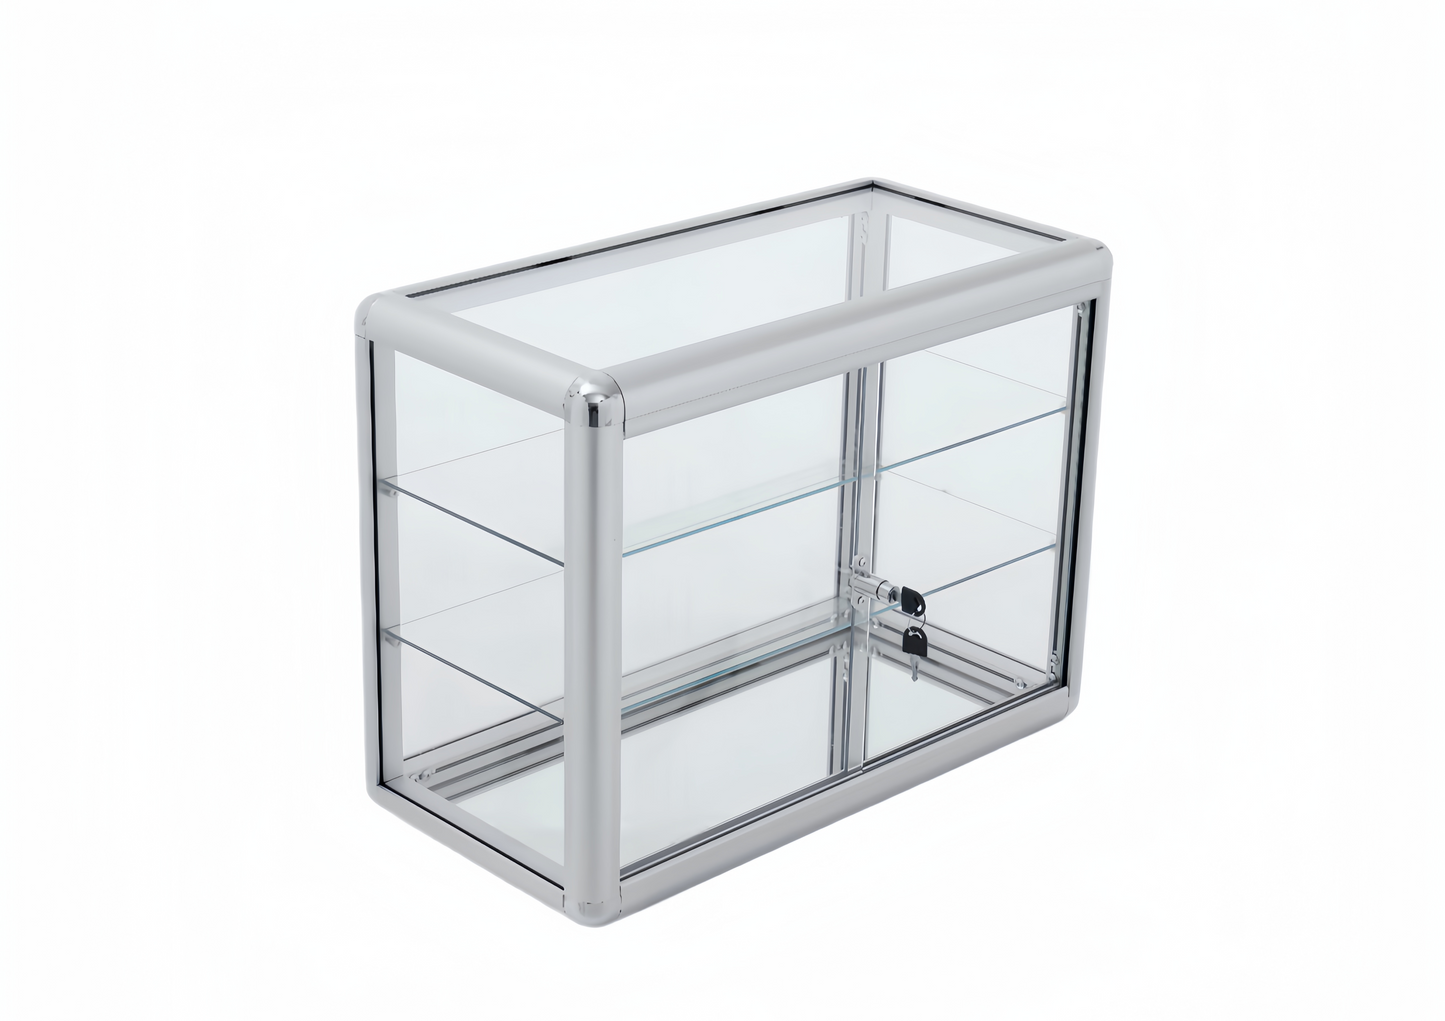 WISDOMFUR 24 x12 inch Aluminum and Glass Countertop Display Showcase -  Stylish Cabinet for Retail, Home, or Office Use  Cabinet